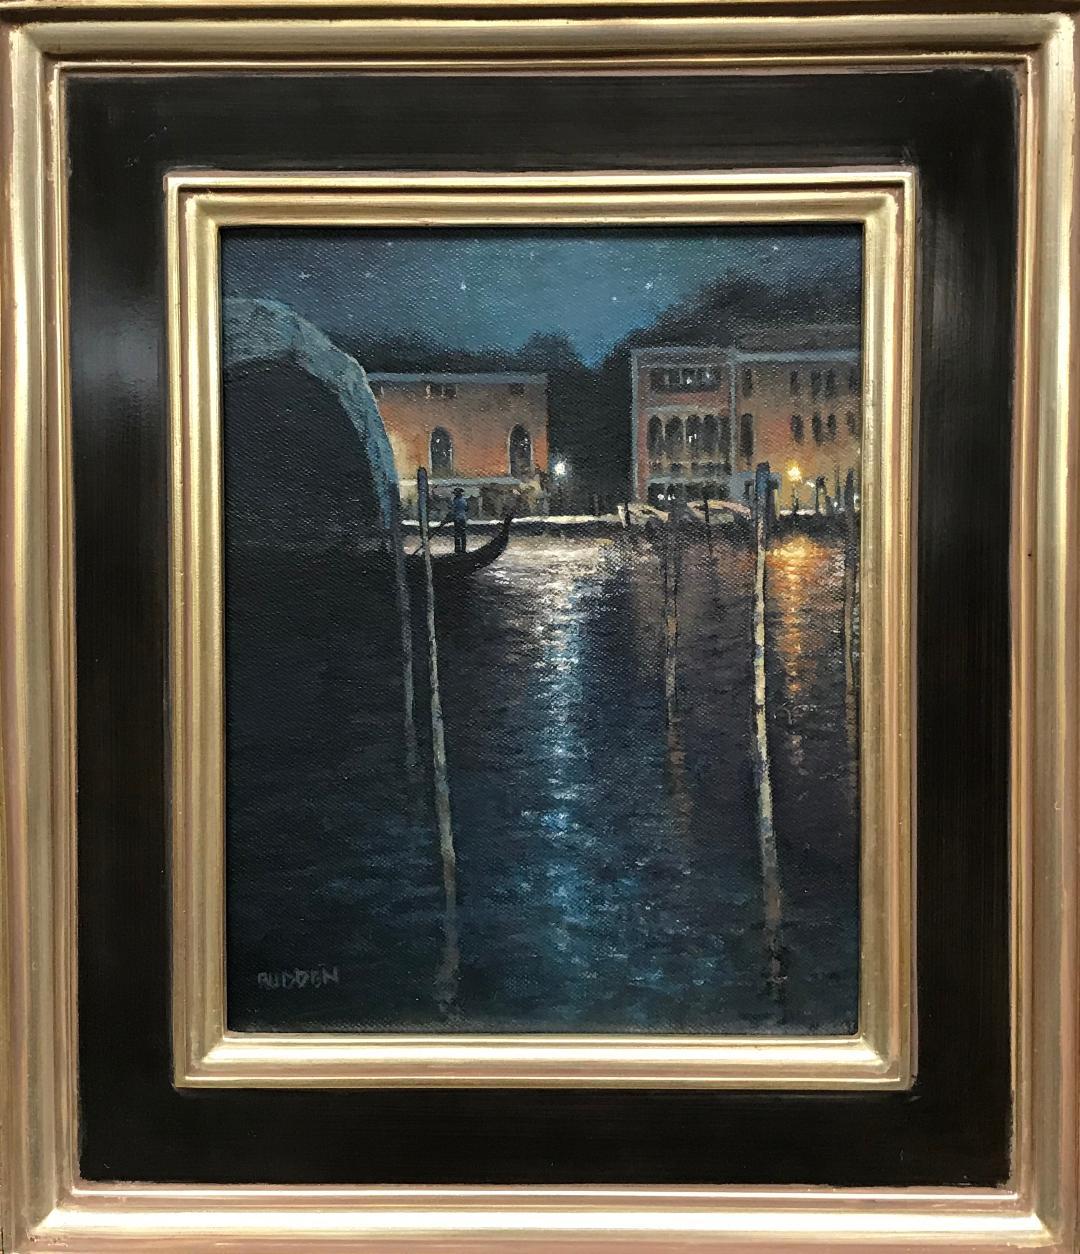 Evening On The Canal, Venice
oil/panel
10 x 8 unframed
Evening On the Canal, Venice is an oil painting on panel by award winning contemporary artist Michael Budden that showcases a dramatic moonlight and reflection effect as a gondola glides